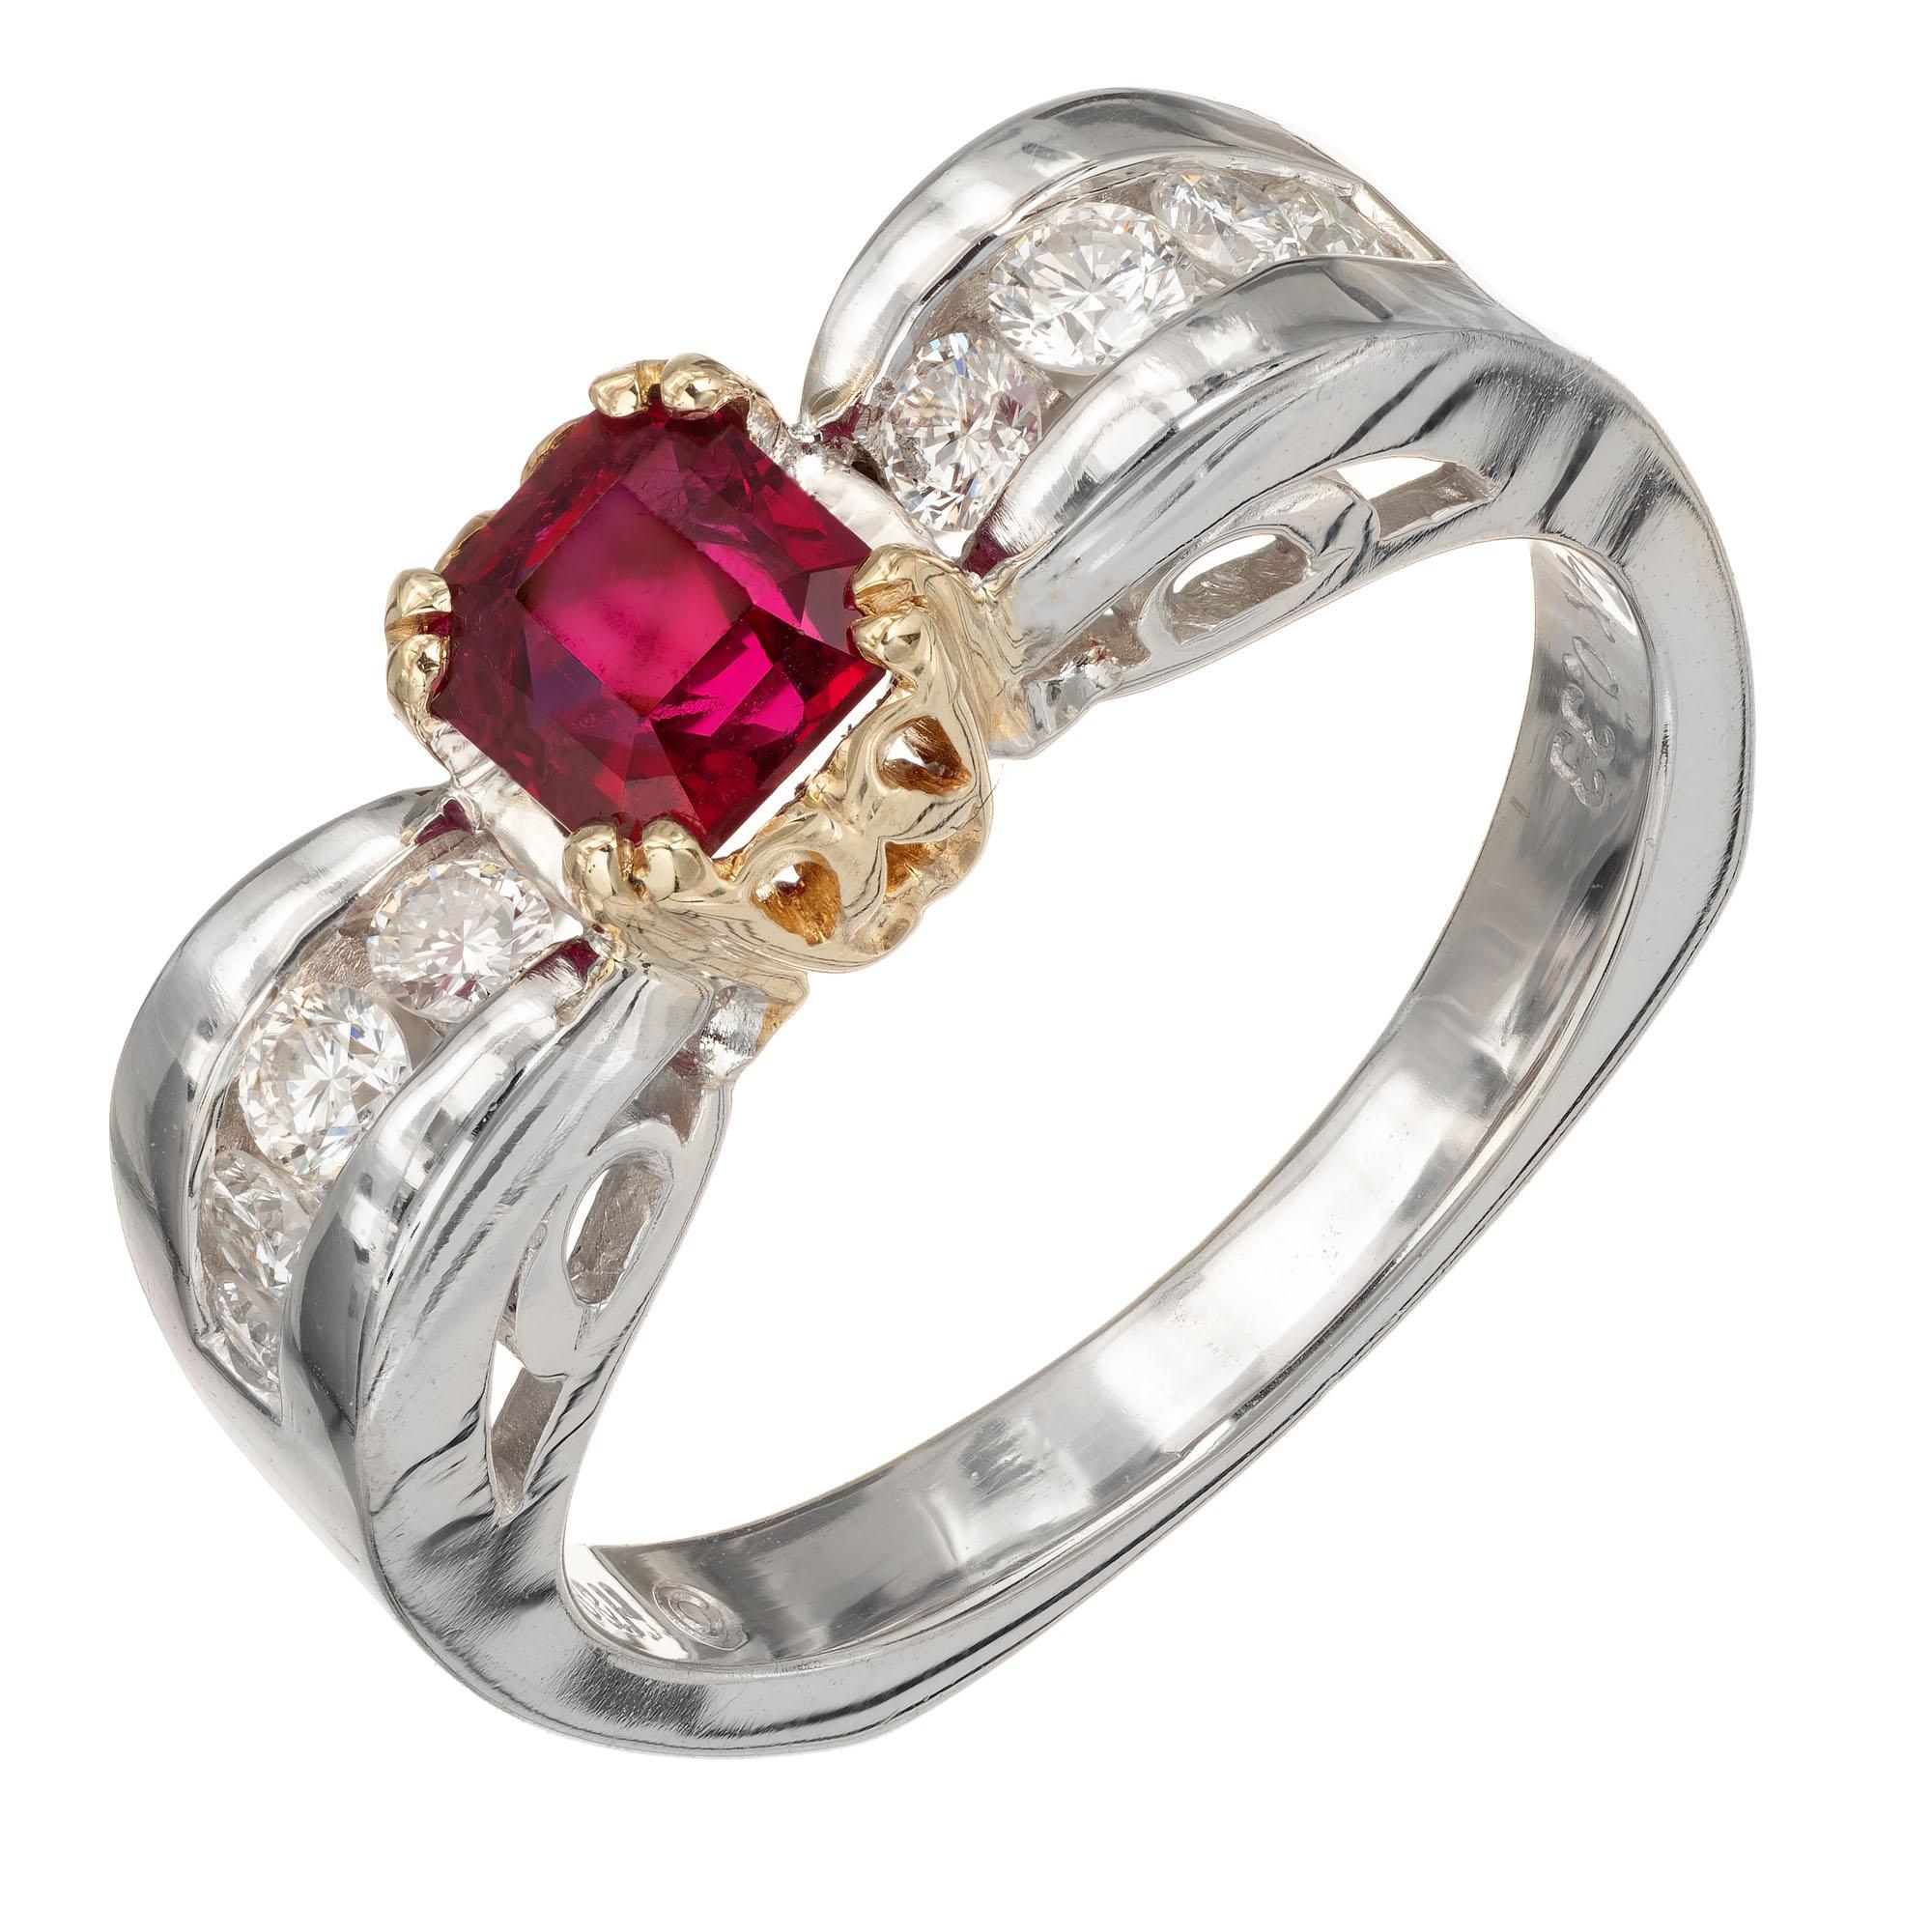 Octagonal red ruby and diamond engagement ring. Center ruby with 8 round accent diamonds along the shank, in a 14k white and yellow gold setting

1 octagonal step cut purplish red Ruby, approx. total weight .75cts, SI, 4.65 x 4.55 x 3.50mm, natural